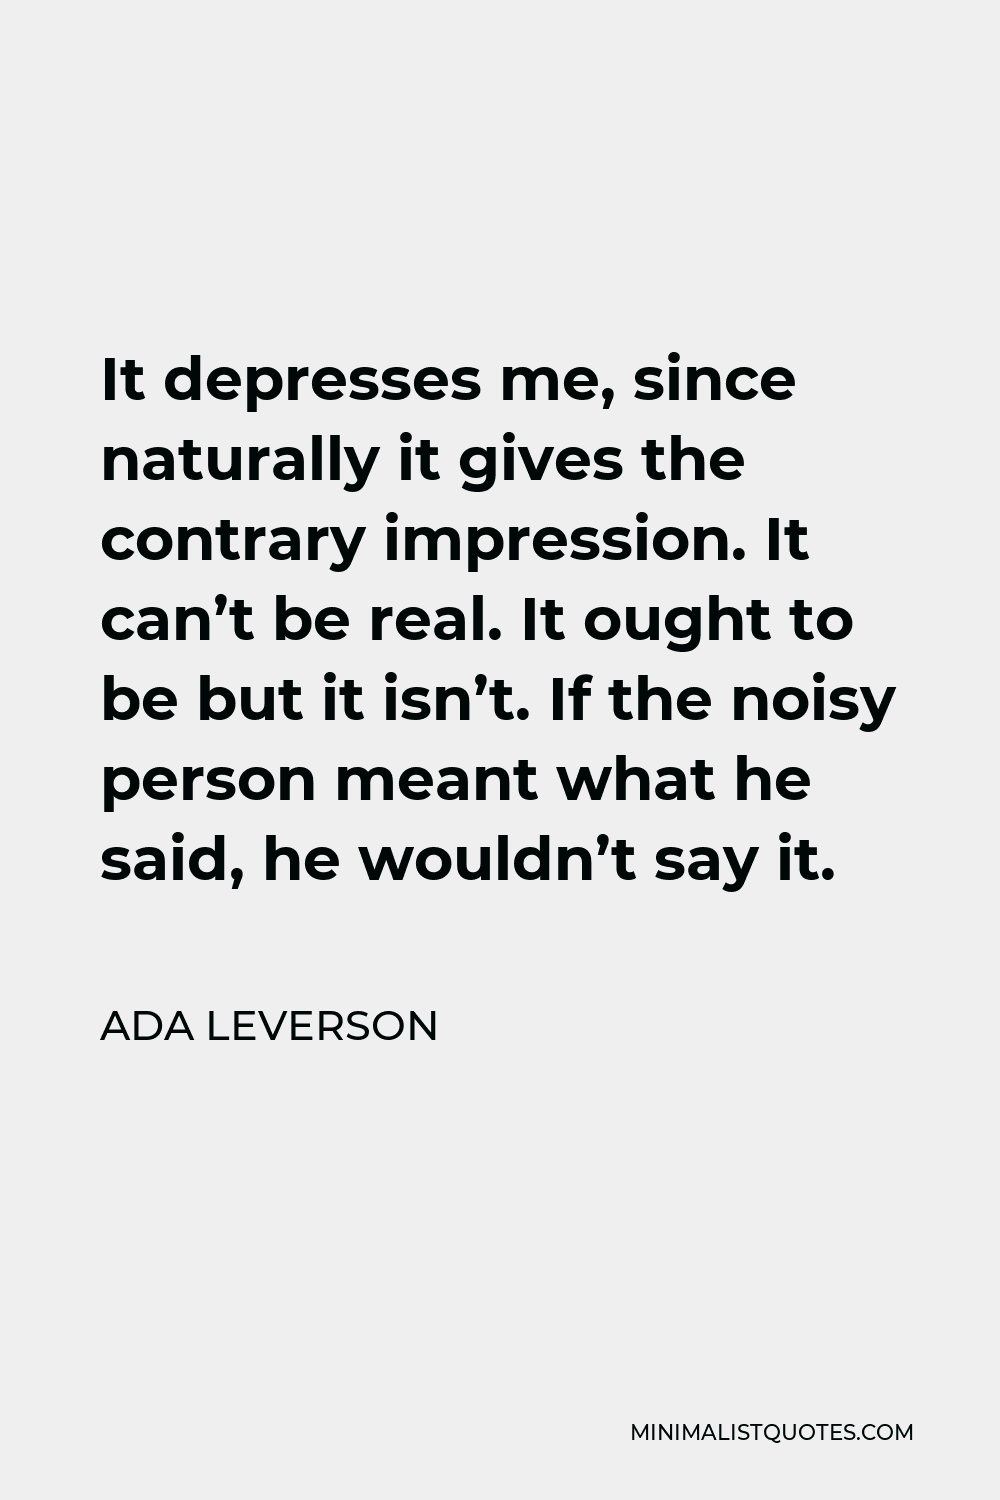 Ada Leverson Quote - It depresses me, since naturally it gives the contrary impression. It can’t be real. It ought to be but it isn’t. If the noisy person meant what he said, he wouldn’t say it.